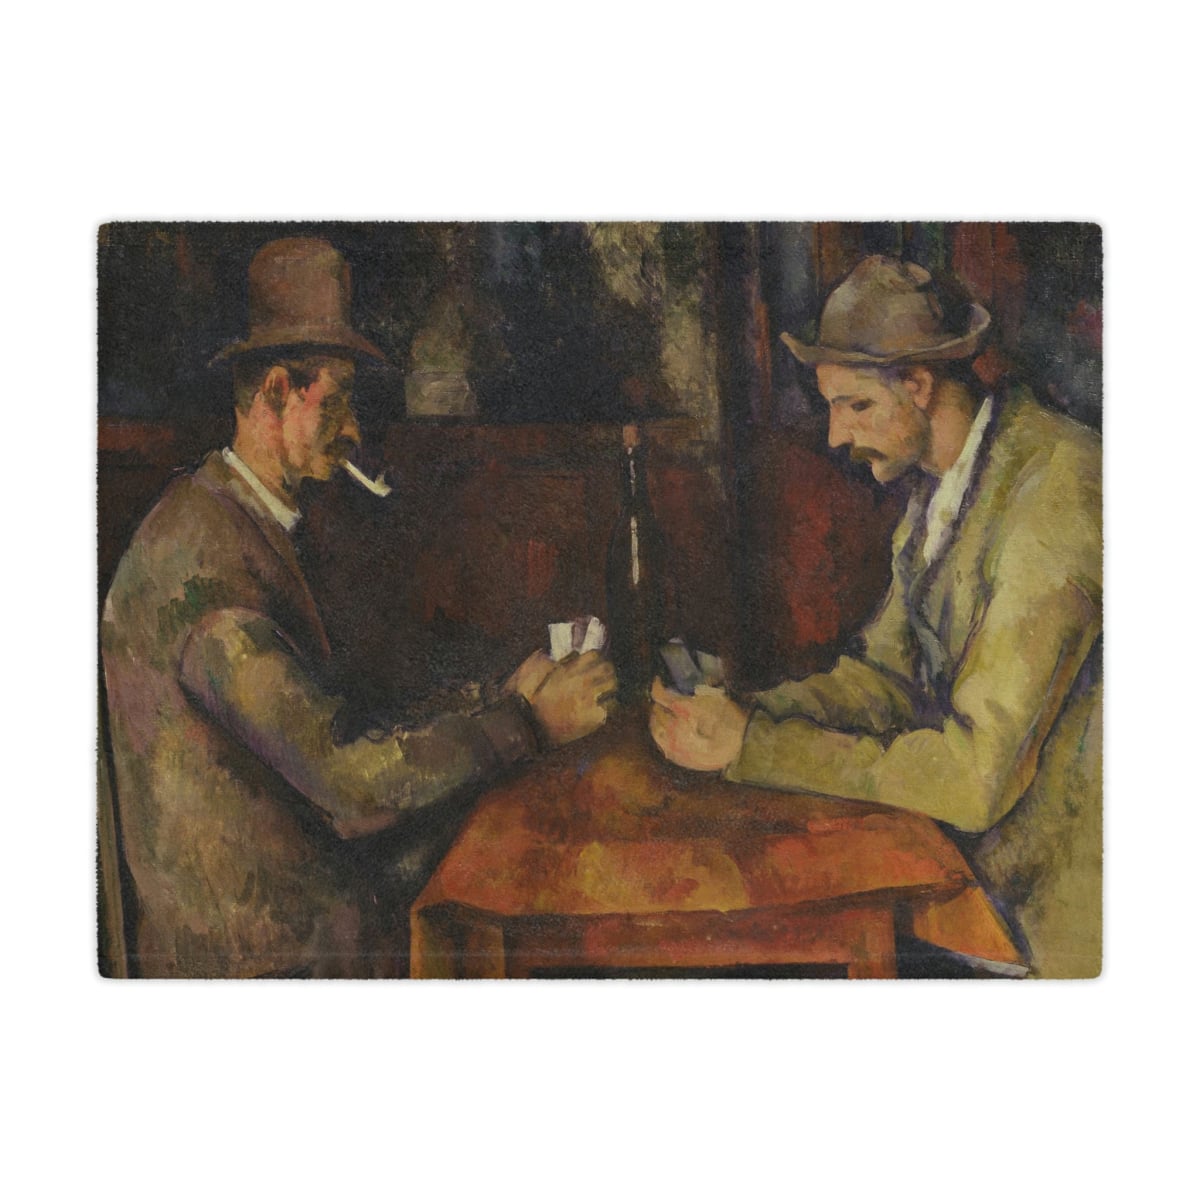 Cézanne’s ’The Card Players’ Art Blanket: A Timeless Masterpiece